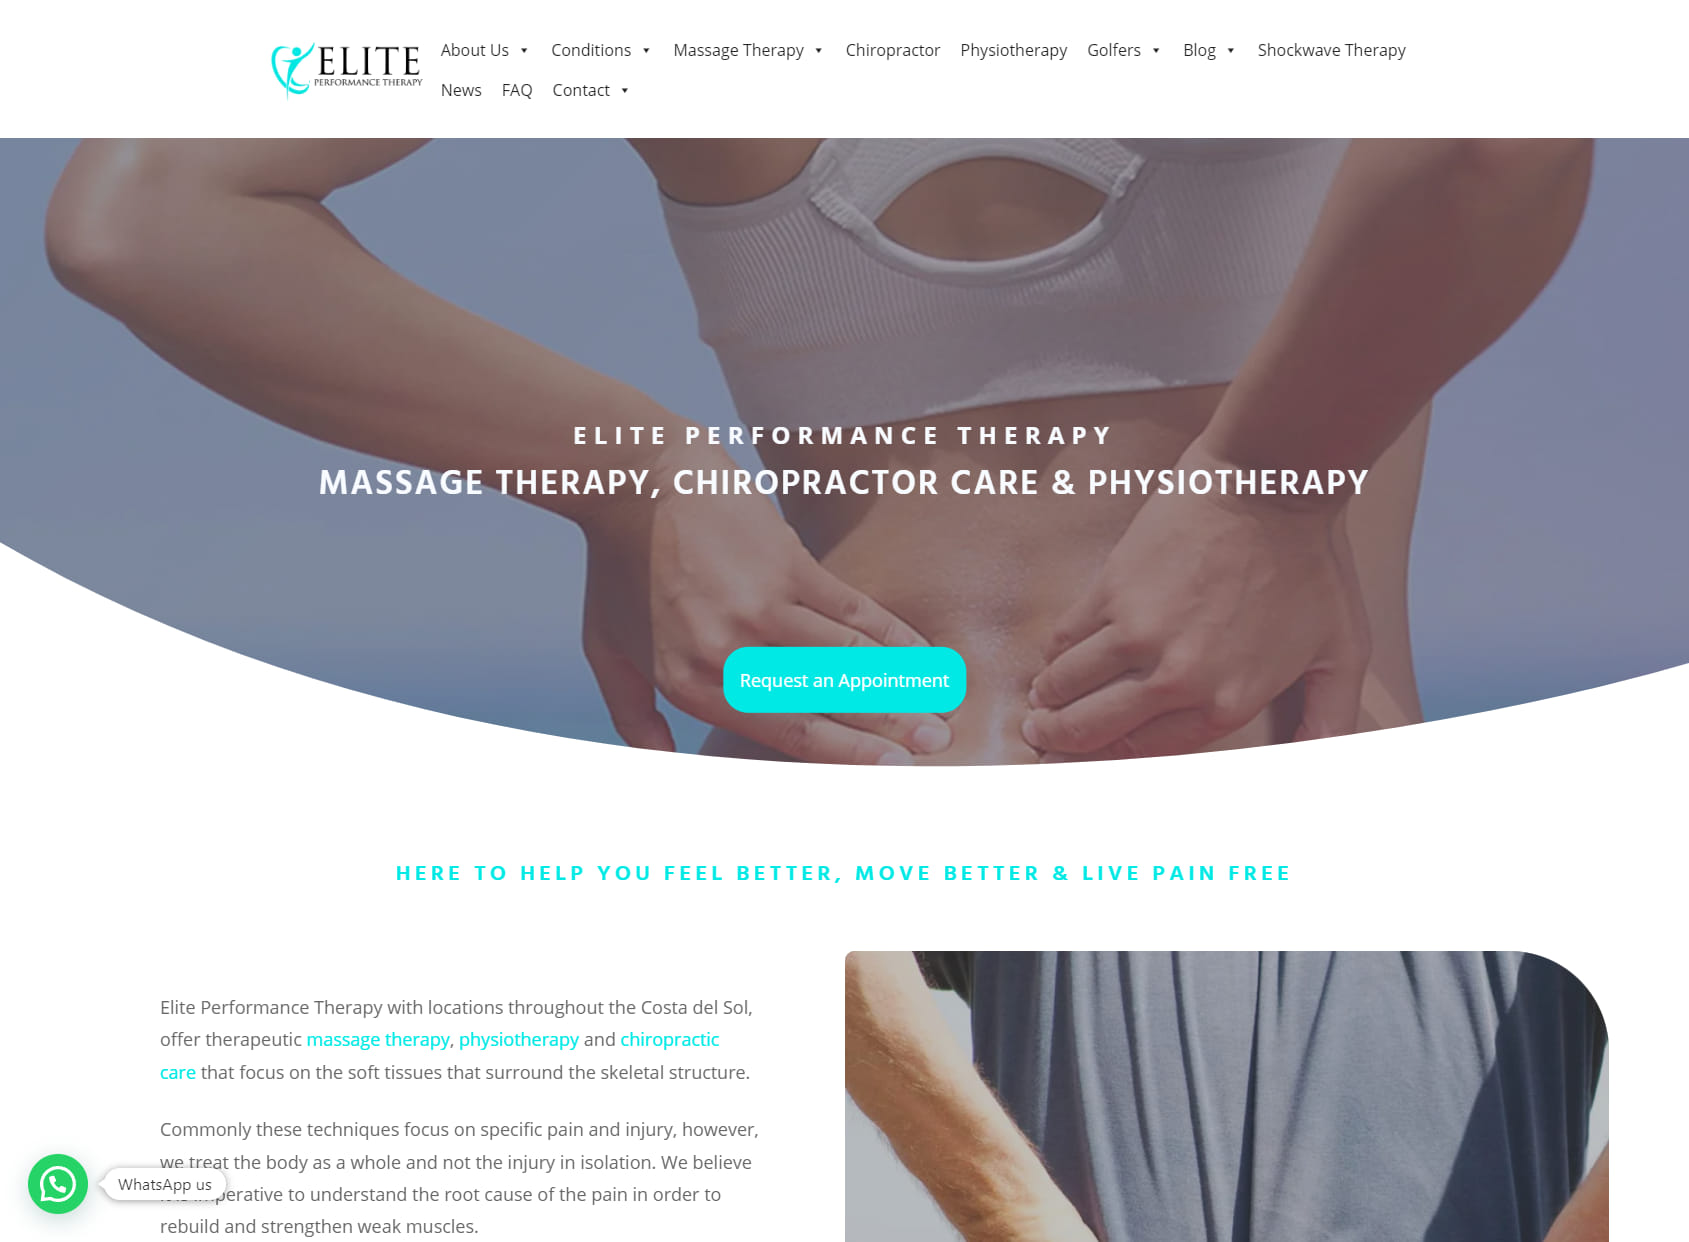 Elite Performance Therapy - Massage Therapy, Chiropractor & Physiotherapy